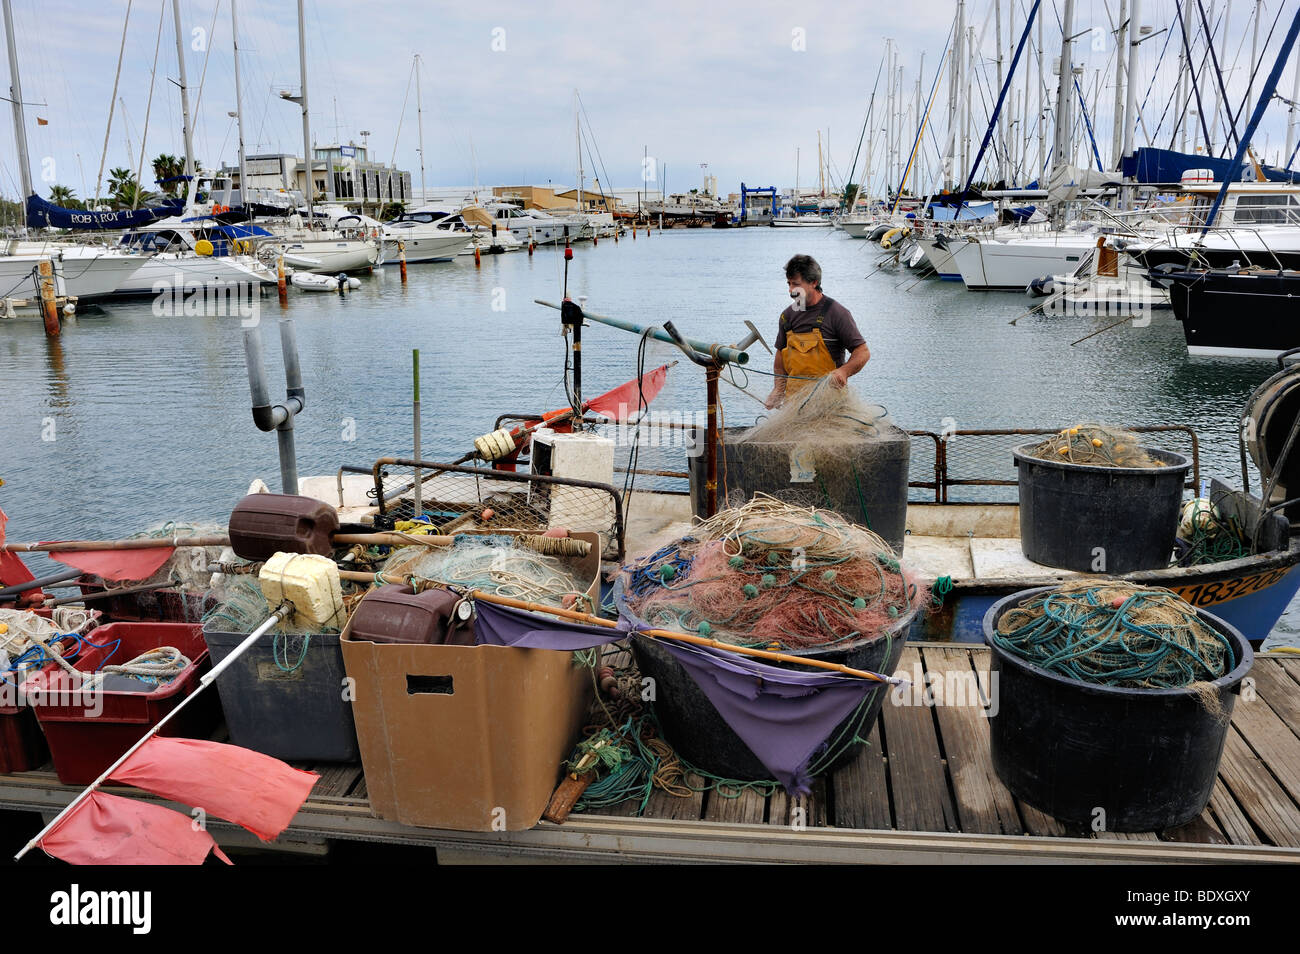 Canet-en-Roussillon, France, Fisherman Cleaning Fishing Nets, Outside Fish Market, Stall, Display, (near Perpignan) Stock Photo